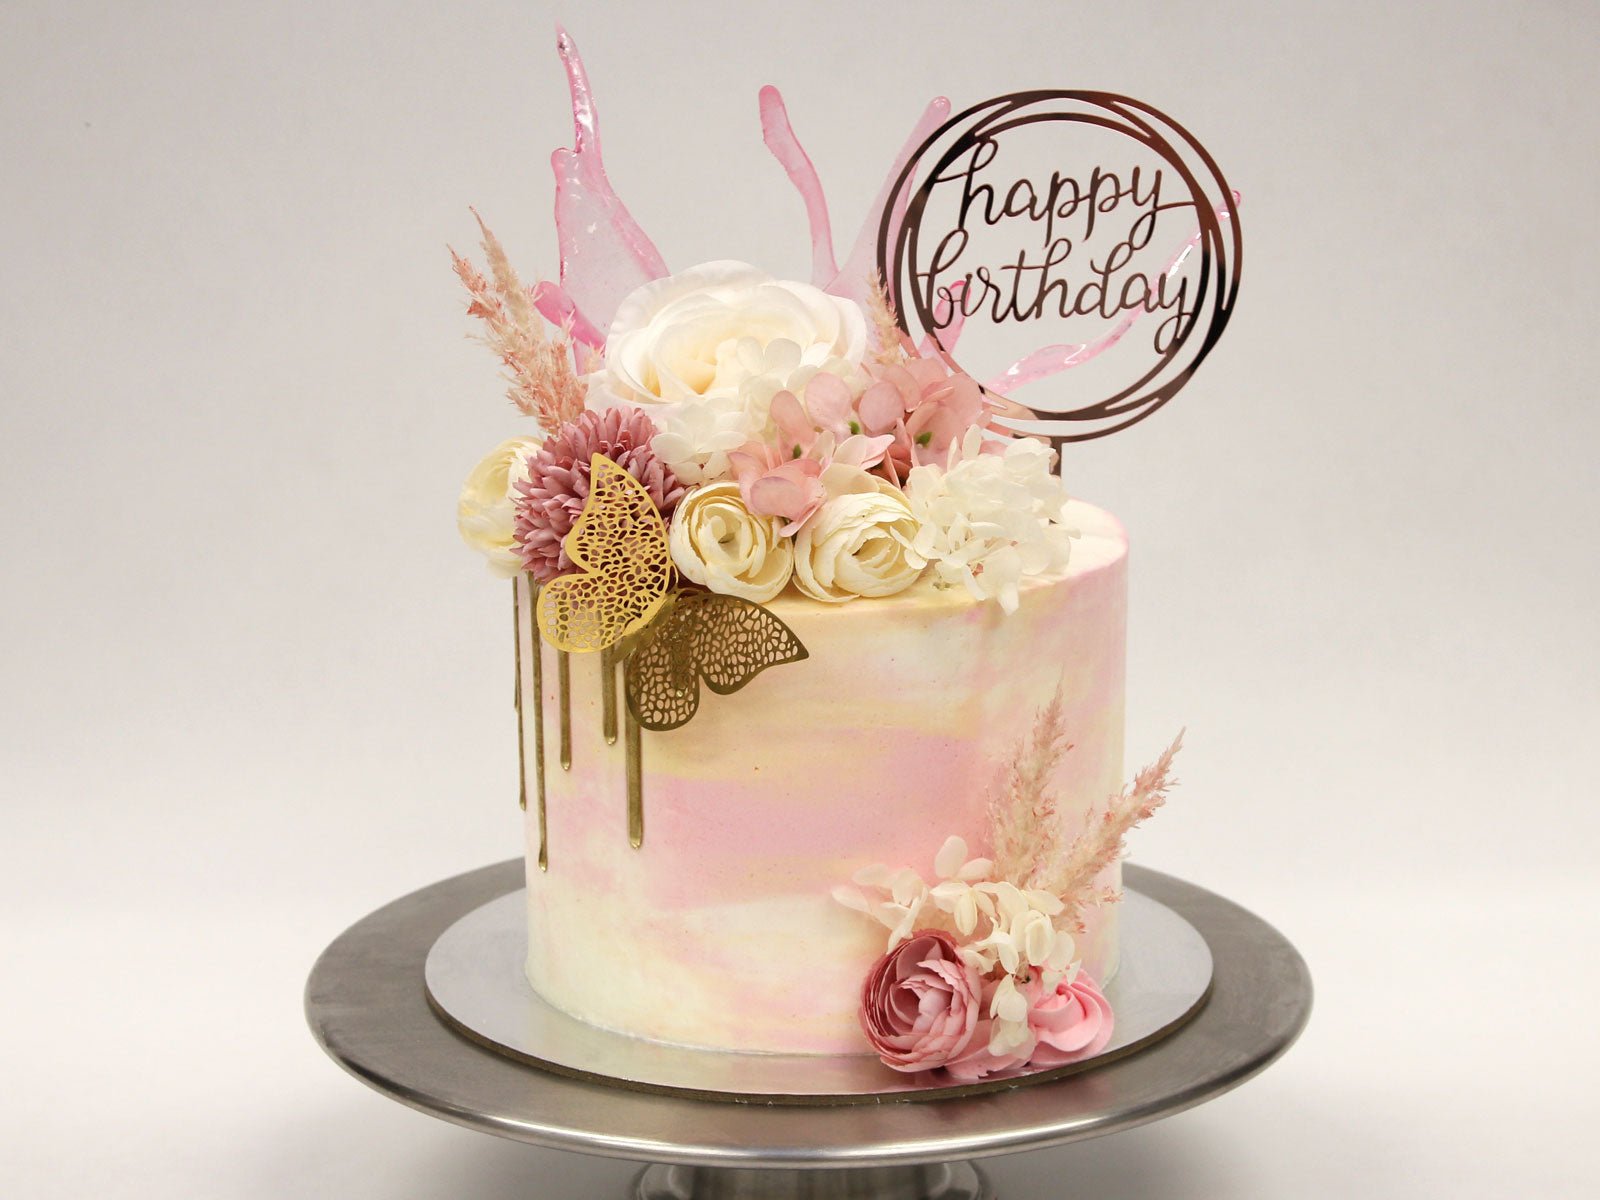 Acrylic Cake Toppers - The Compassionate Kitchen